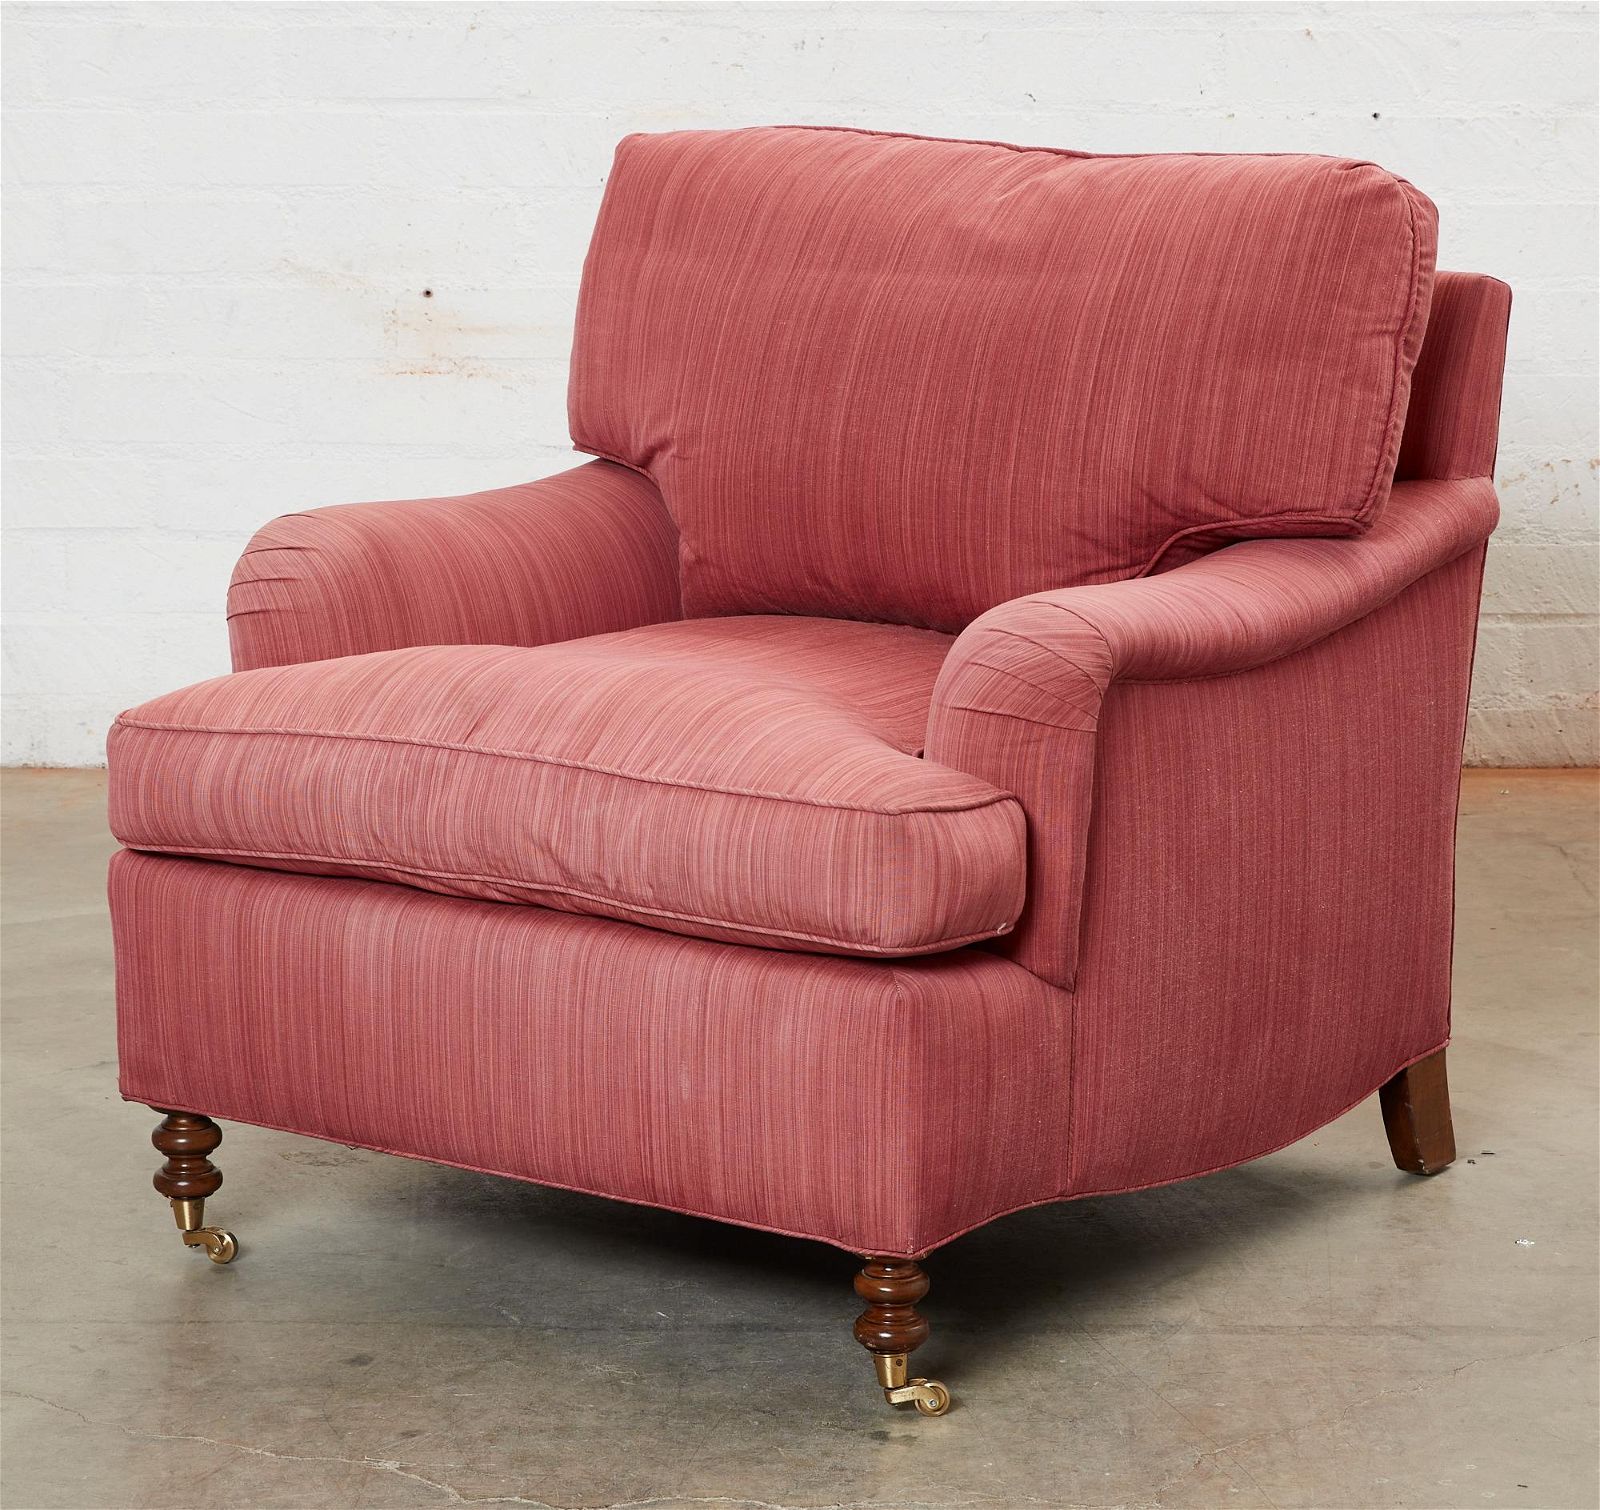 A PINK SATIN UPHOLSTERED CLUB ARMCHAIRA